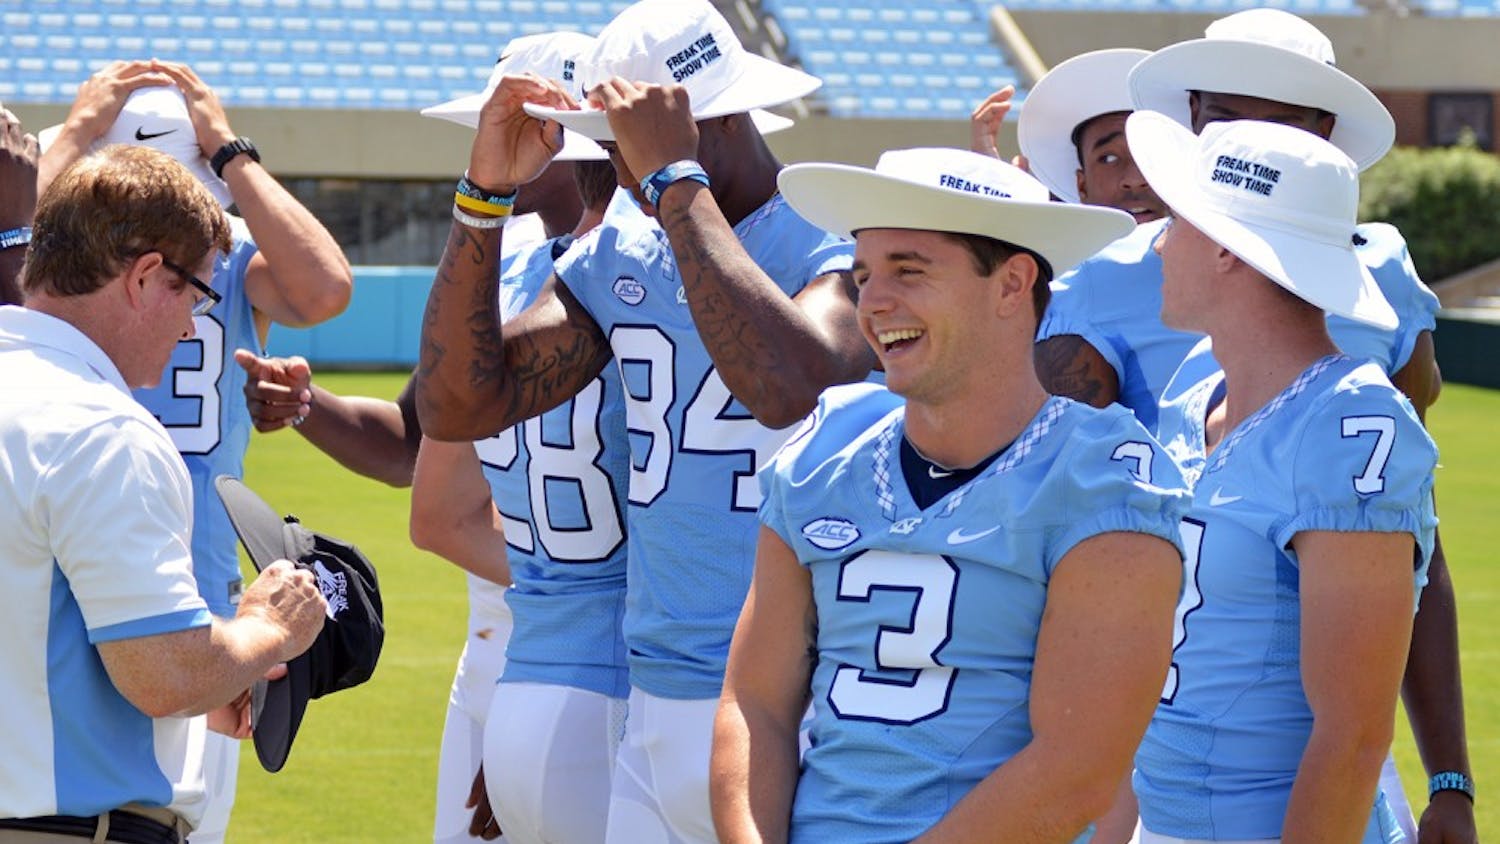 North Carolina wide receiver Ryan Switzer (3) waits for a position group photo to be taken at UNC Football Media Day on Wednesday, Aug. 12.